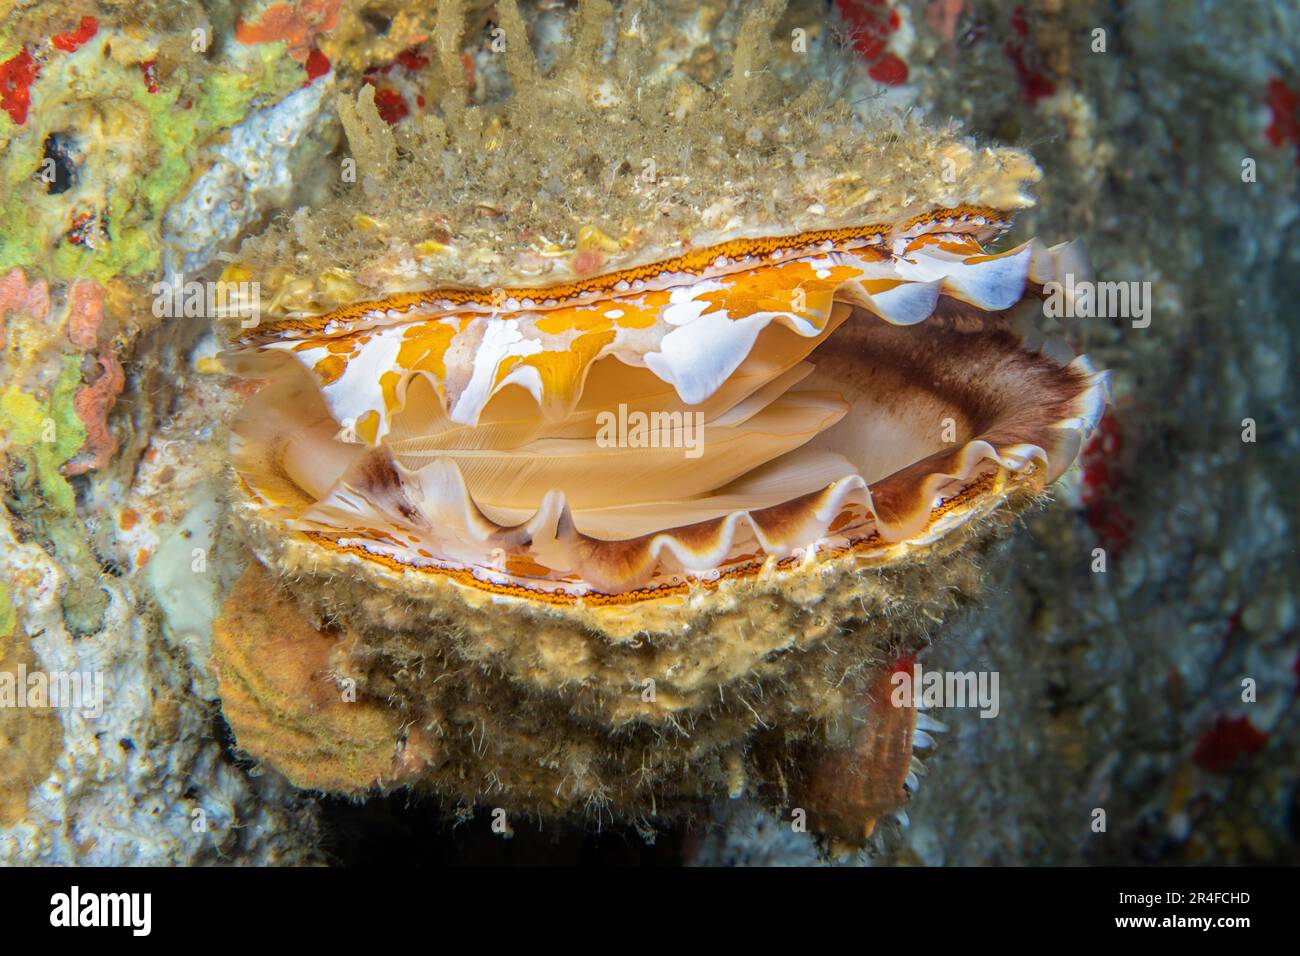 A look inside a Spondylus or Giant Thorny Oyster shell, Spondylus varius, showing the mantle. This species was previously known as Spondylus varians. Stock Photo